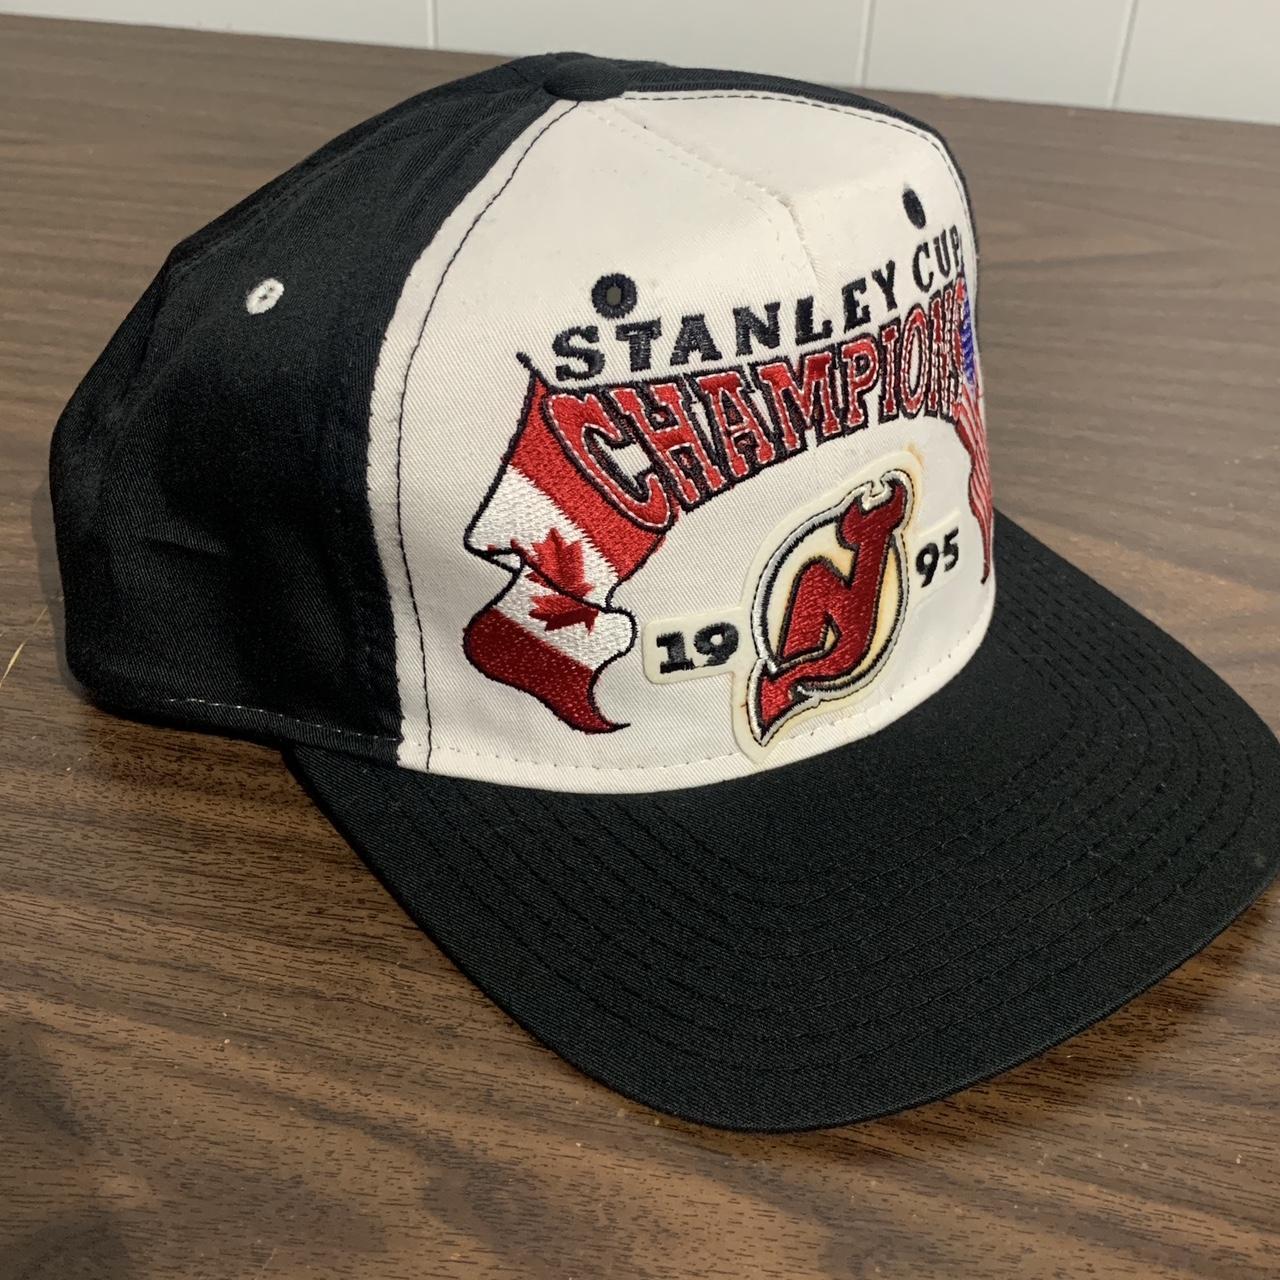 NEW JERSEY DEVILS NHL HOCKEY 1995 STANLEY CUP CHAMPIONS SNAPBACK